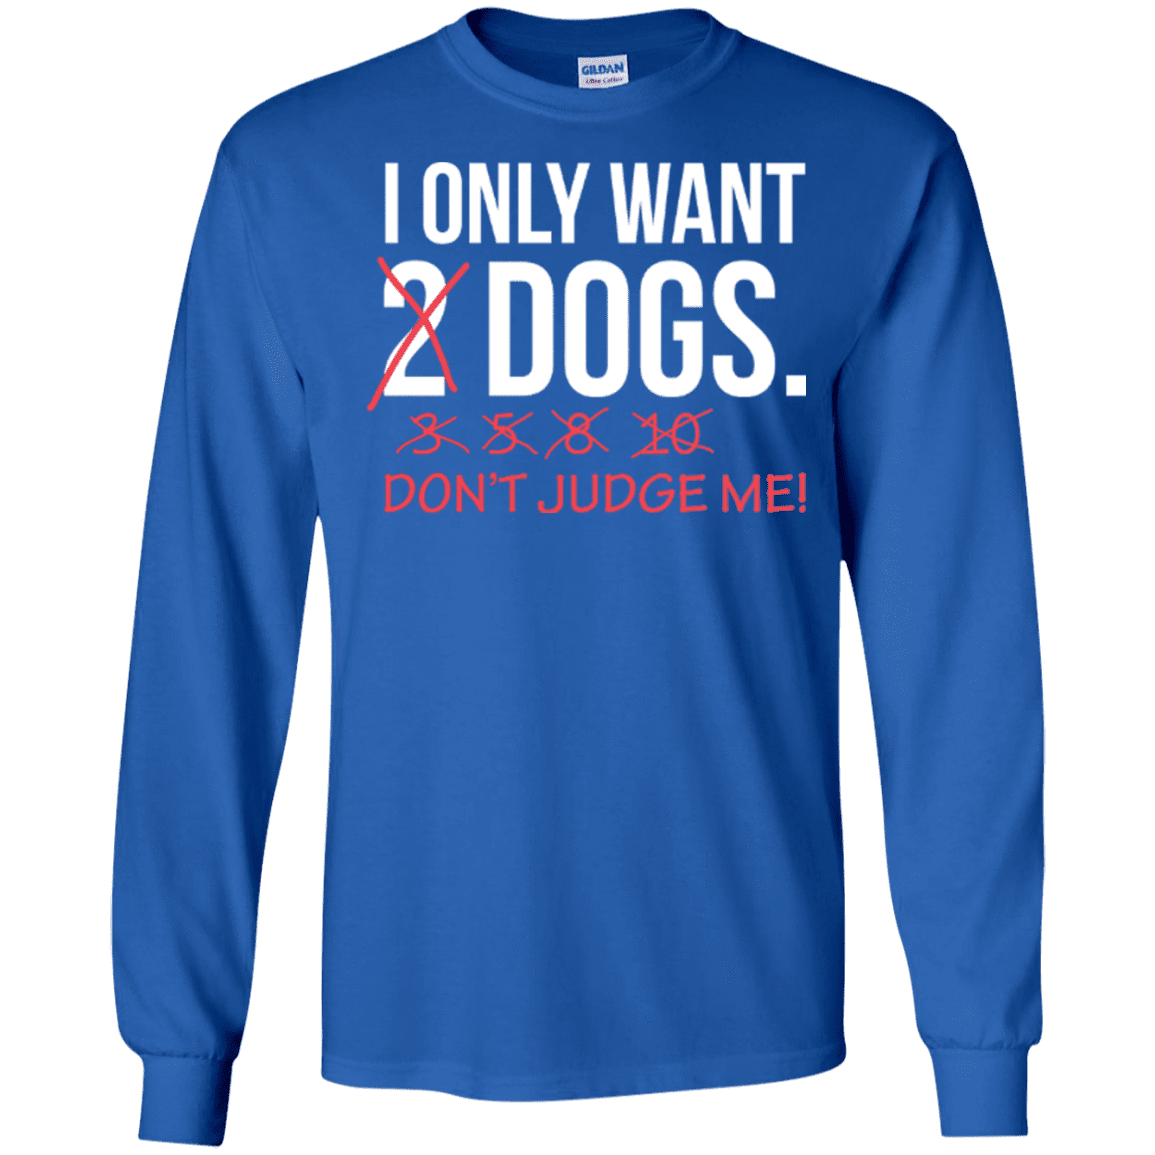 I Only Want 2 Dogs - Long Sleeve T Shirt.